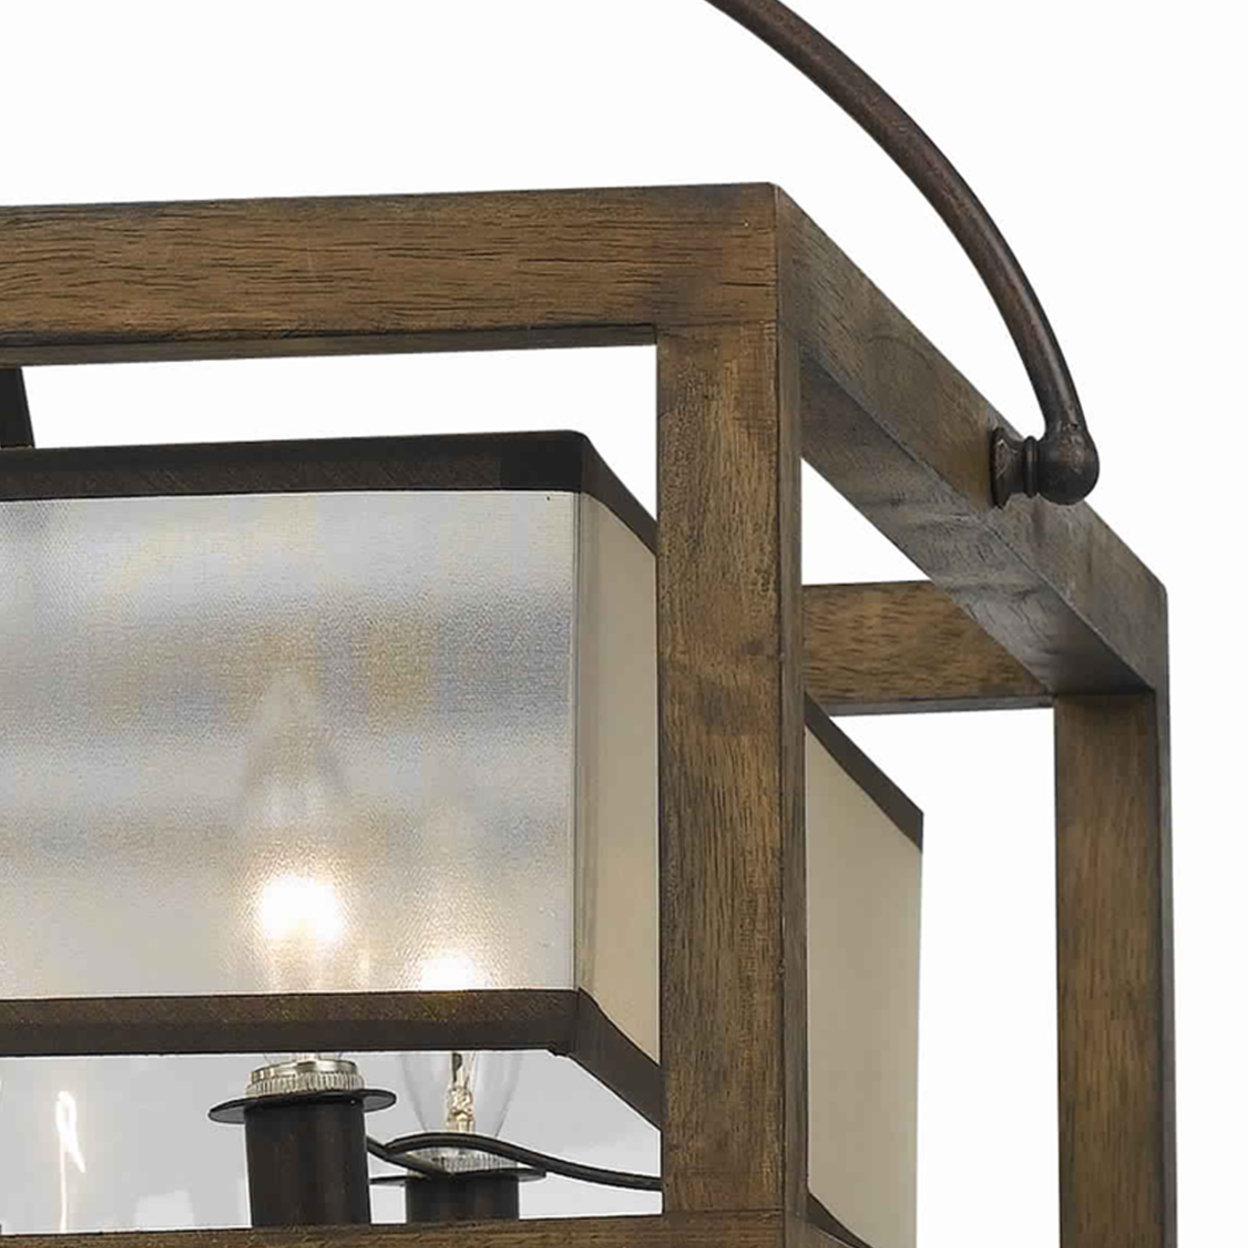 6 Bulb Square Chandelier With Wooden Frame And Organza Striped Shade, Brown- Saltoro Sherpi